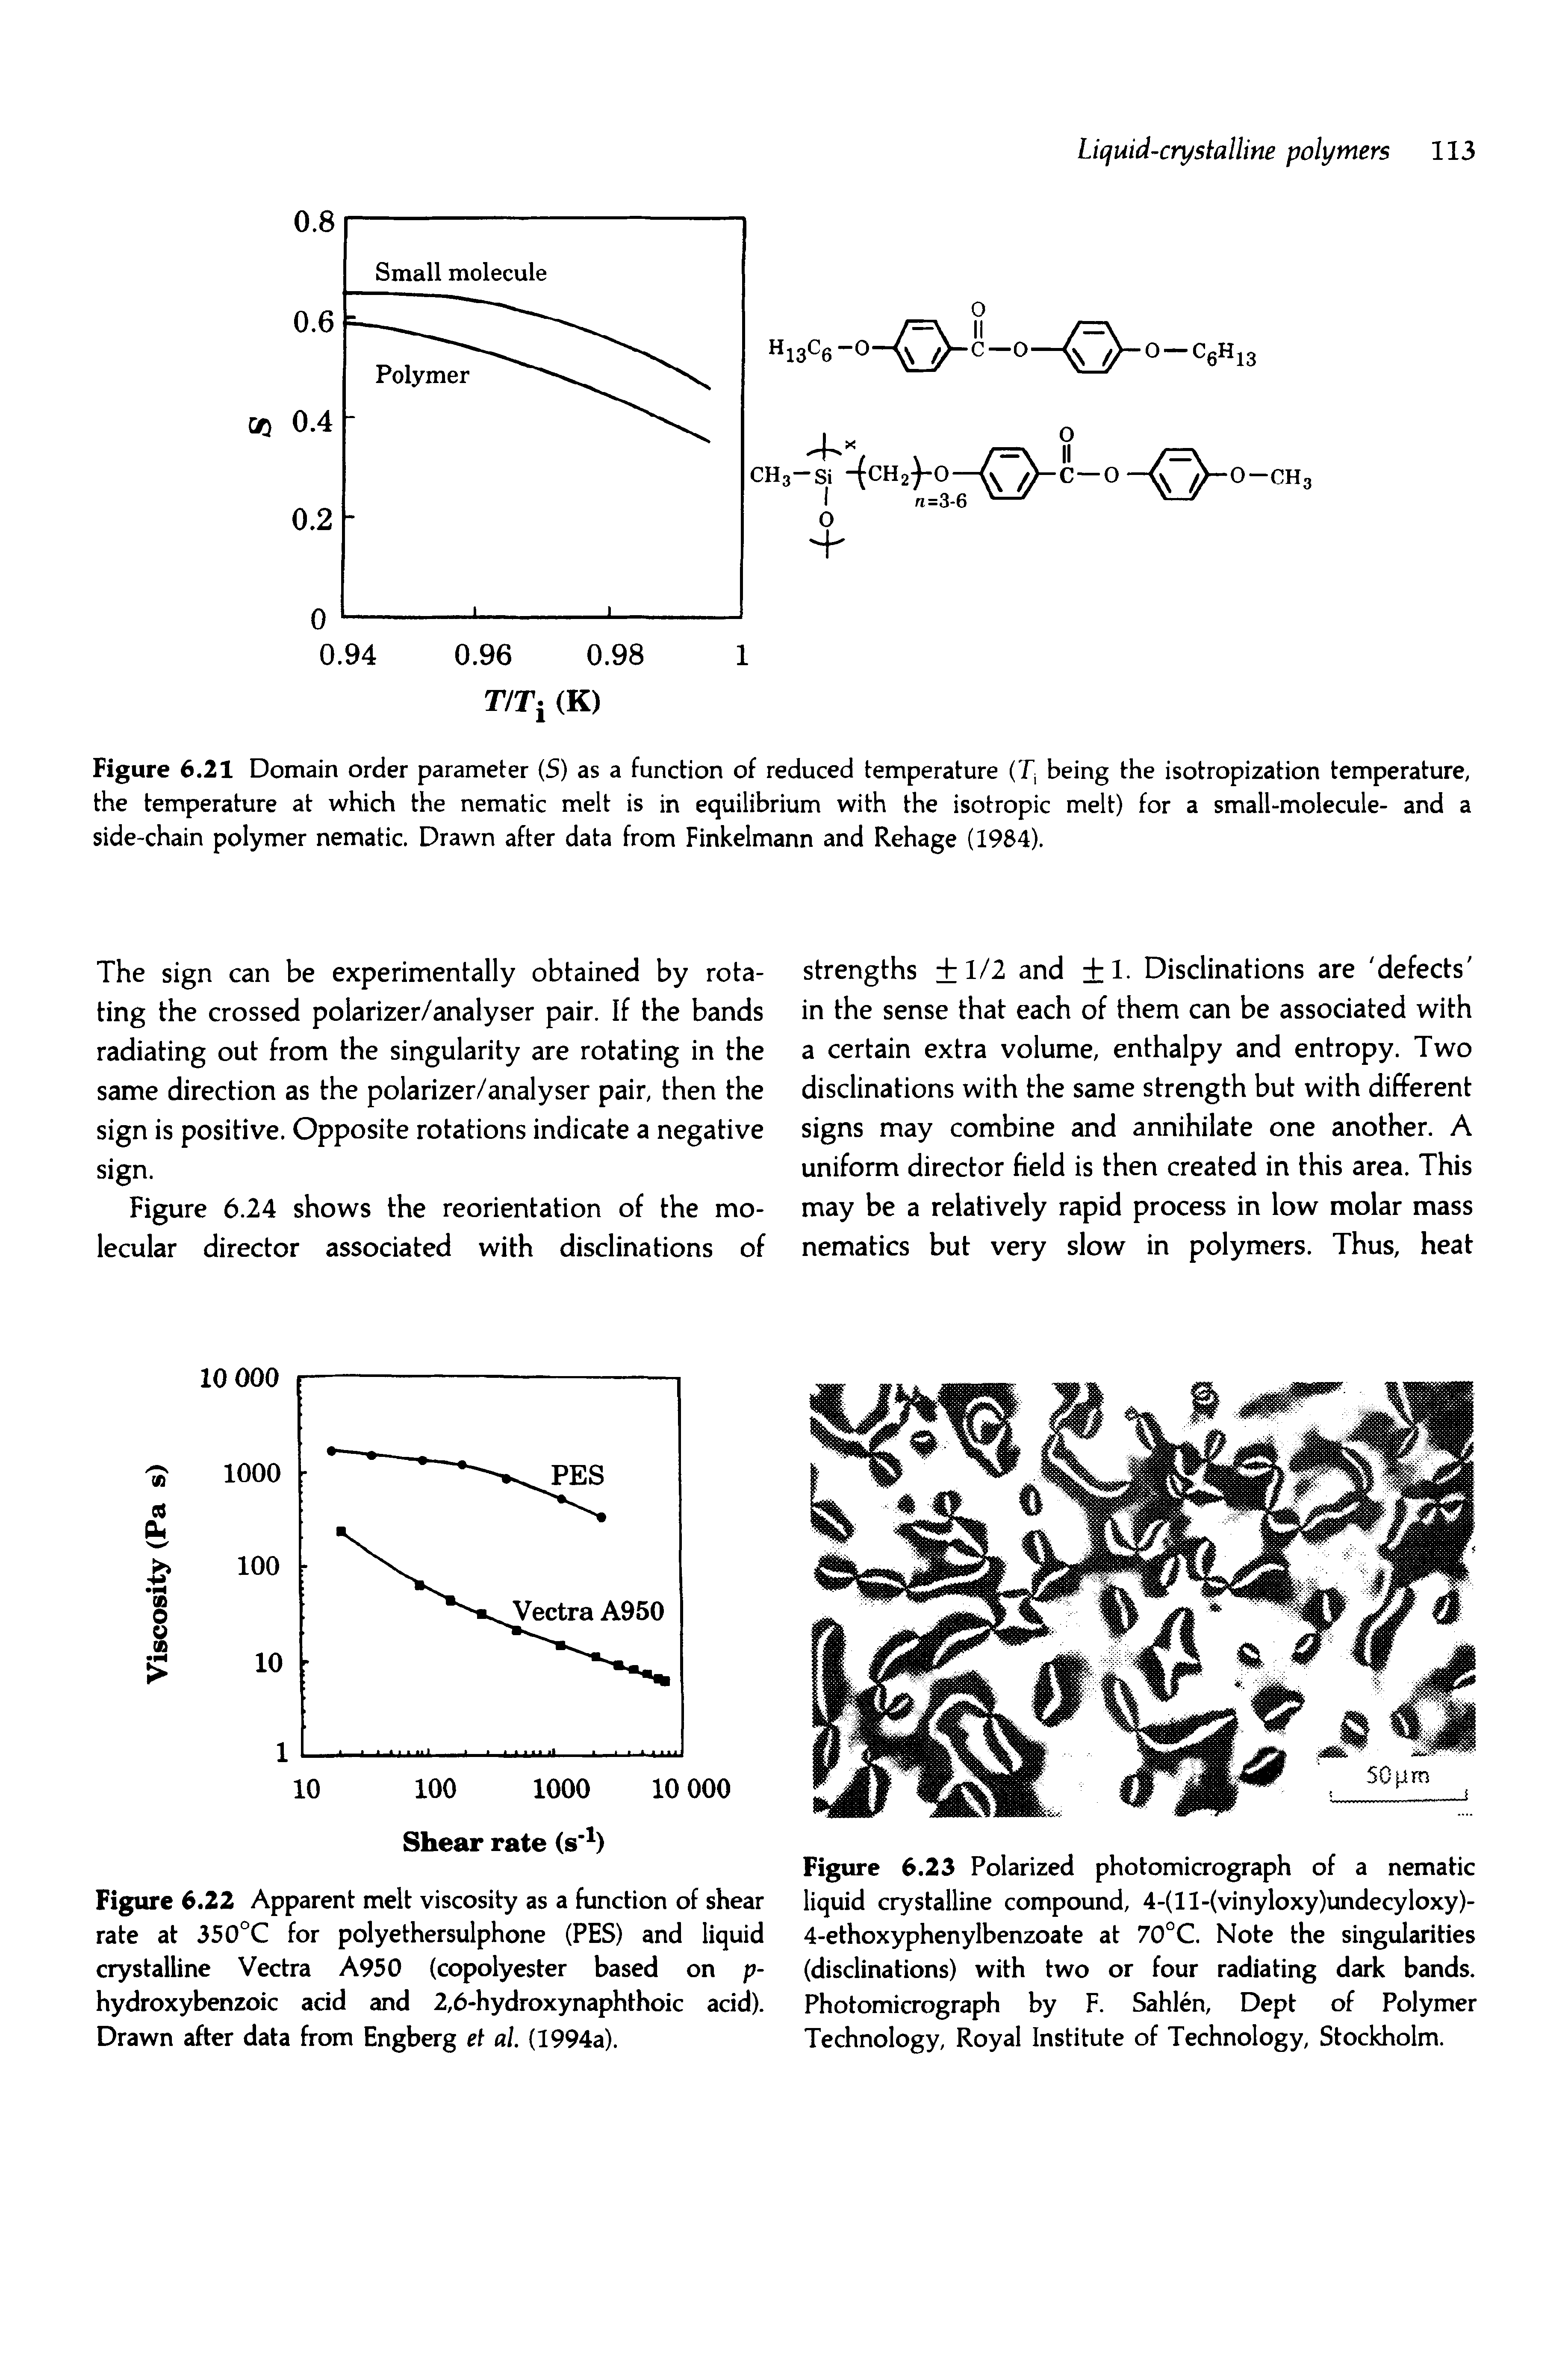 Figure 6.22 Apparent melt viscosity as a function of shear rate at 350°C for polyethersulphone (PES) and liquid crystalline Vectra A950 (copolyester based on p-hydroxybenzoic acid and 2,6-hydroxynaphthoic acid). Drawn after data from Engberg et al (1994a).